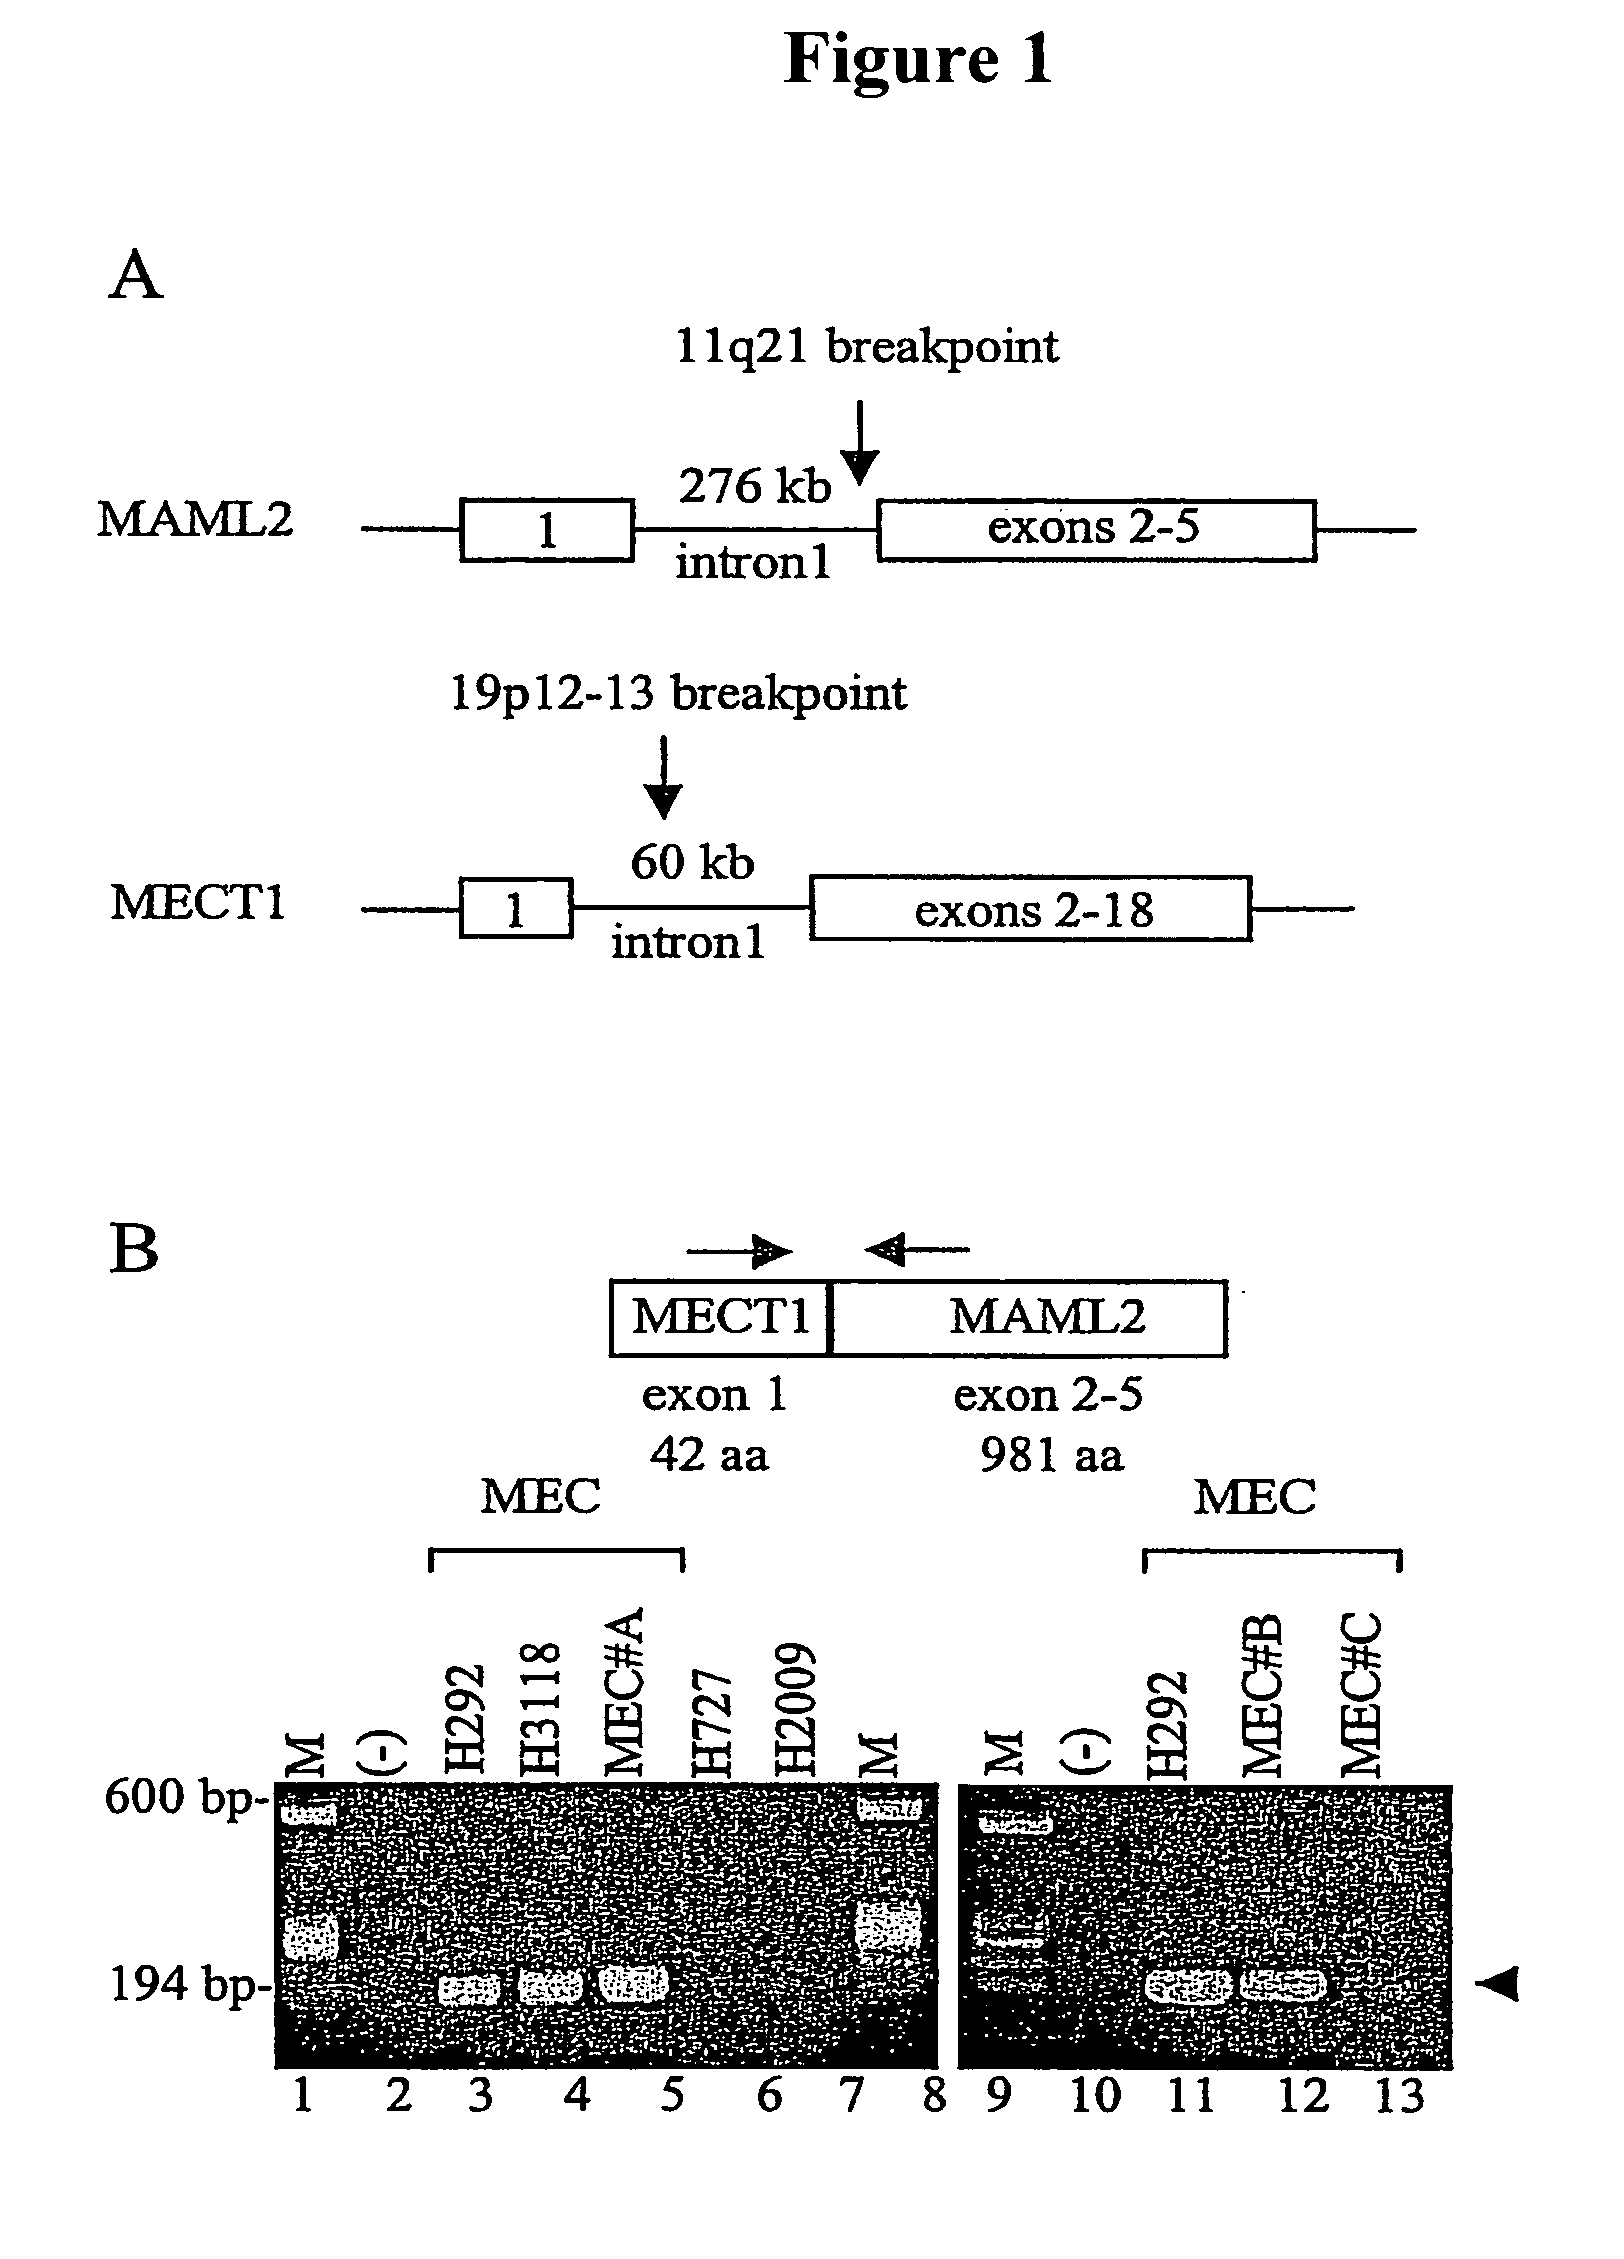 Detection of MECT1-MAML2 fusion products